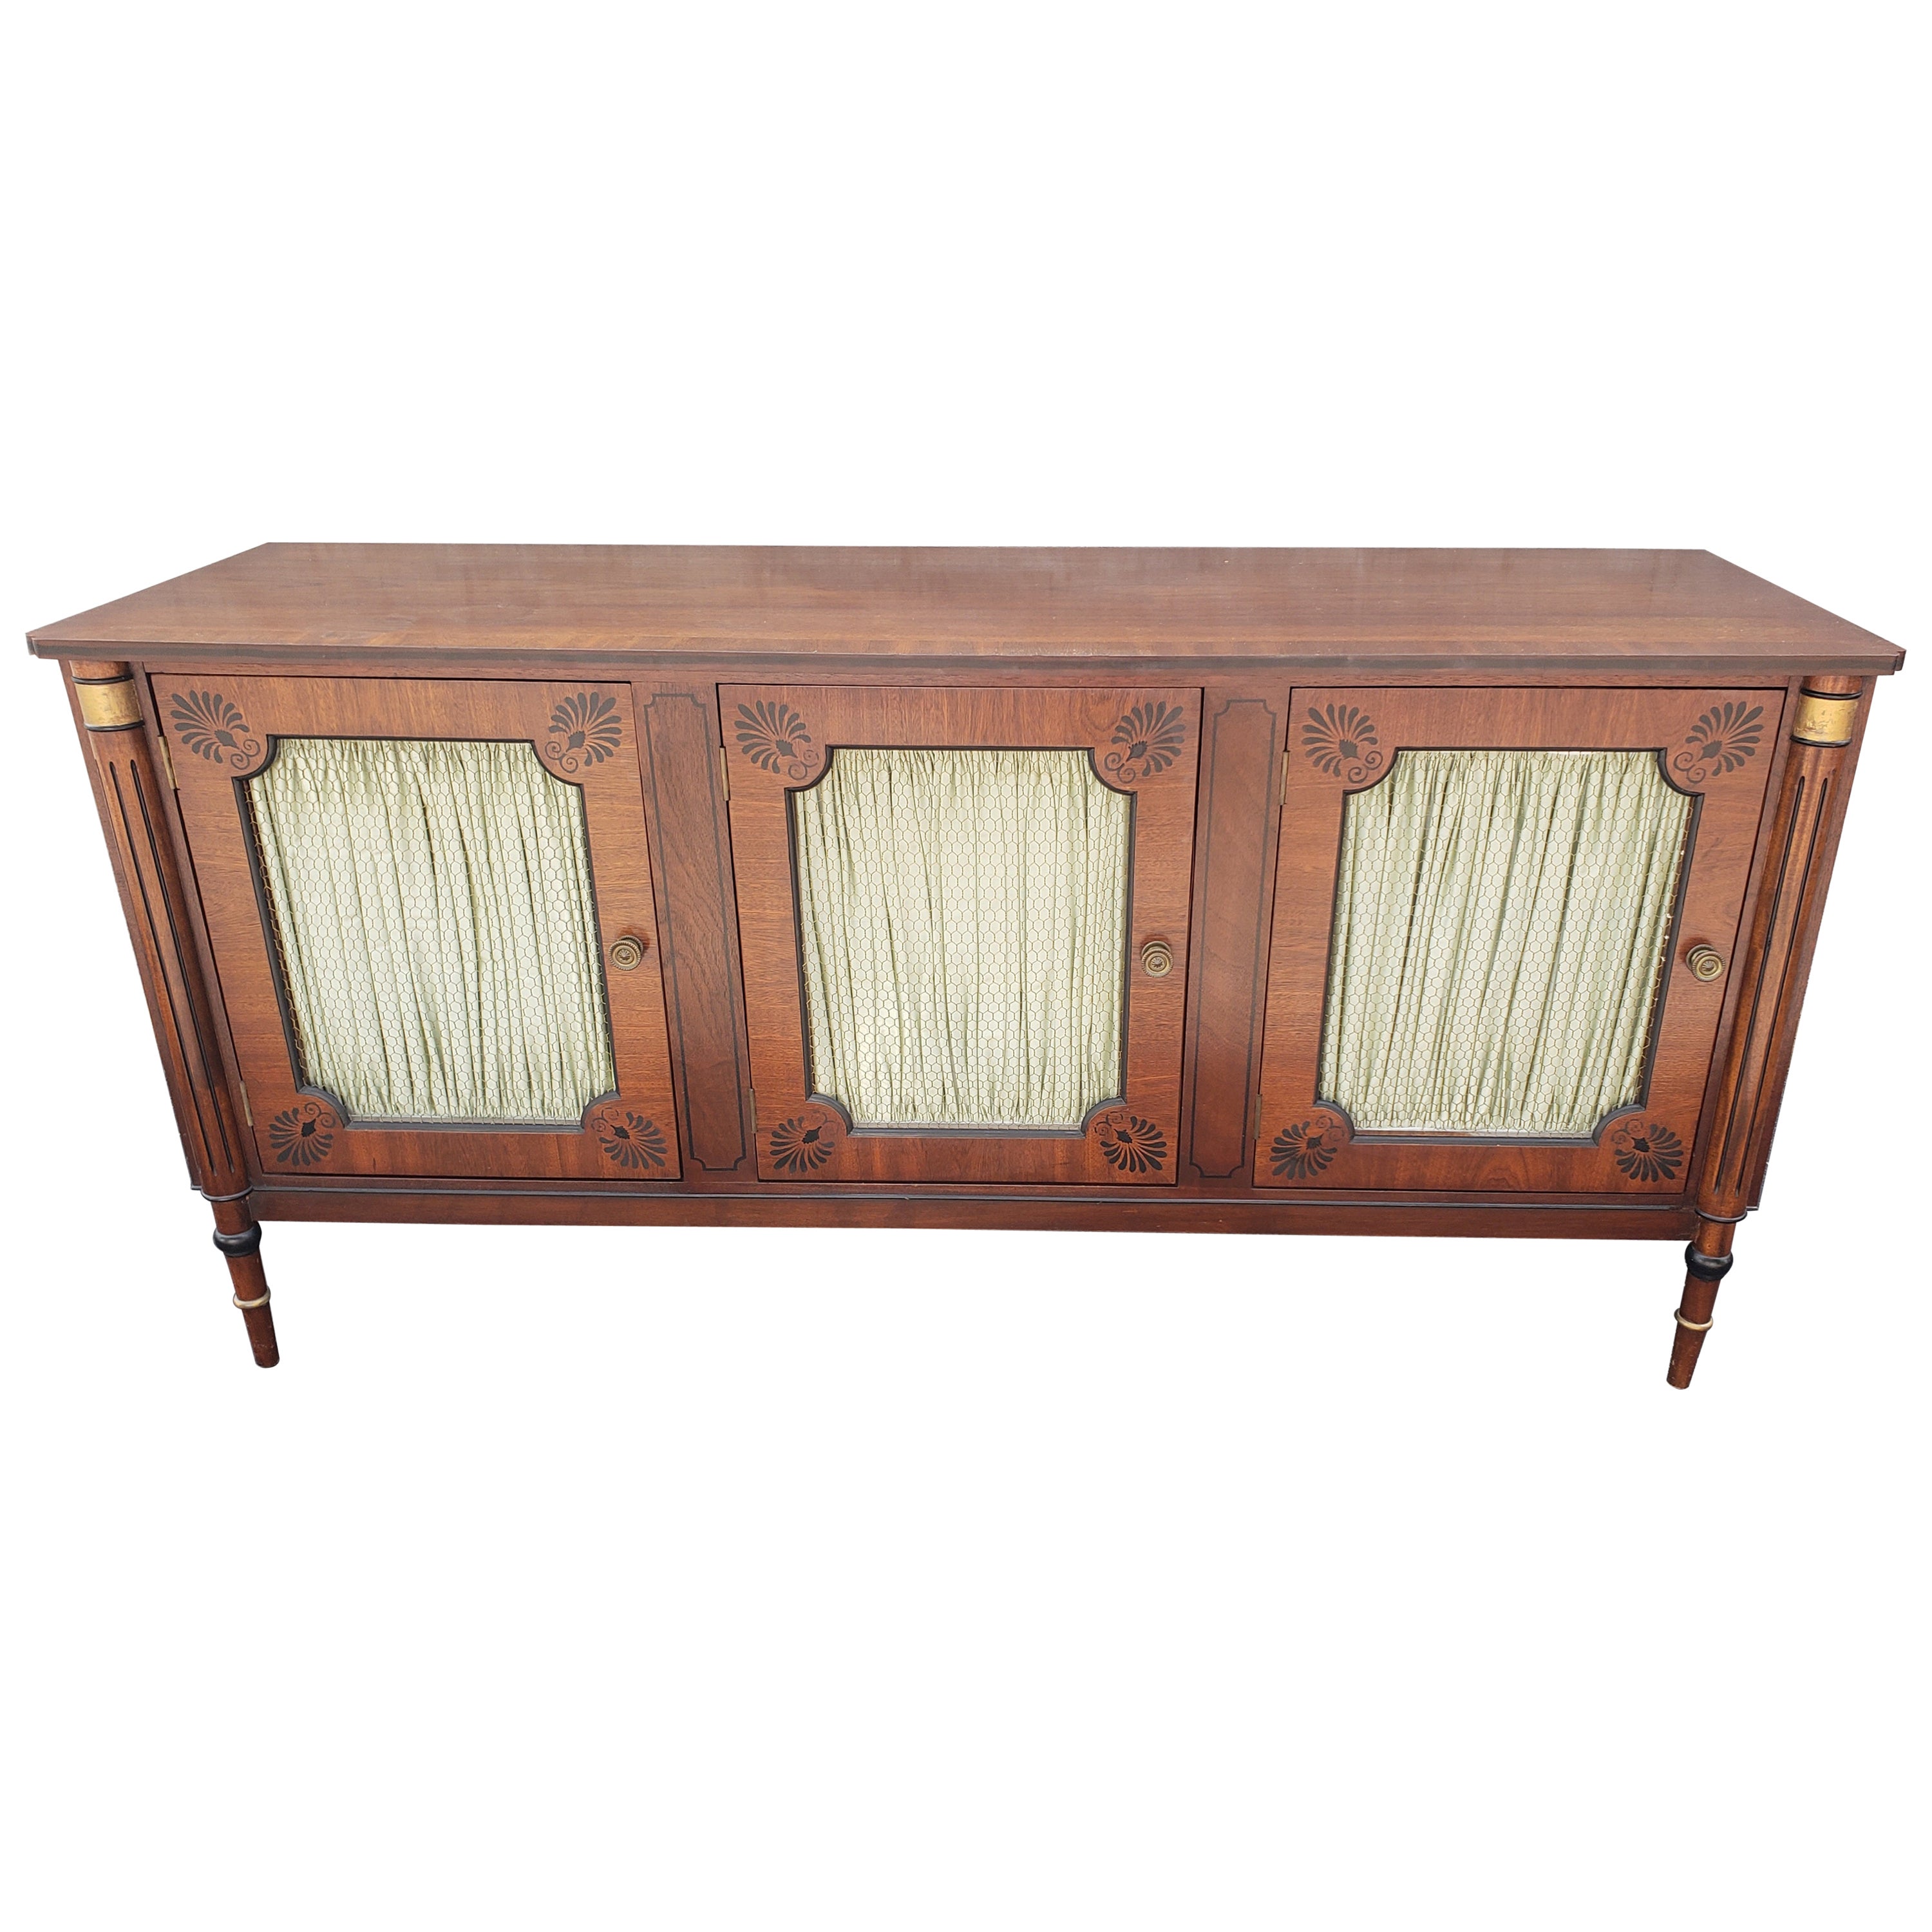 Nicholas James Neoclassic Mahogany Sideboard with Curtains and Mesh Doors